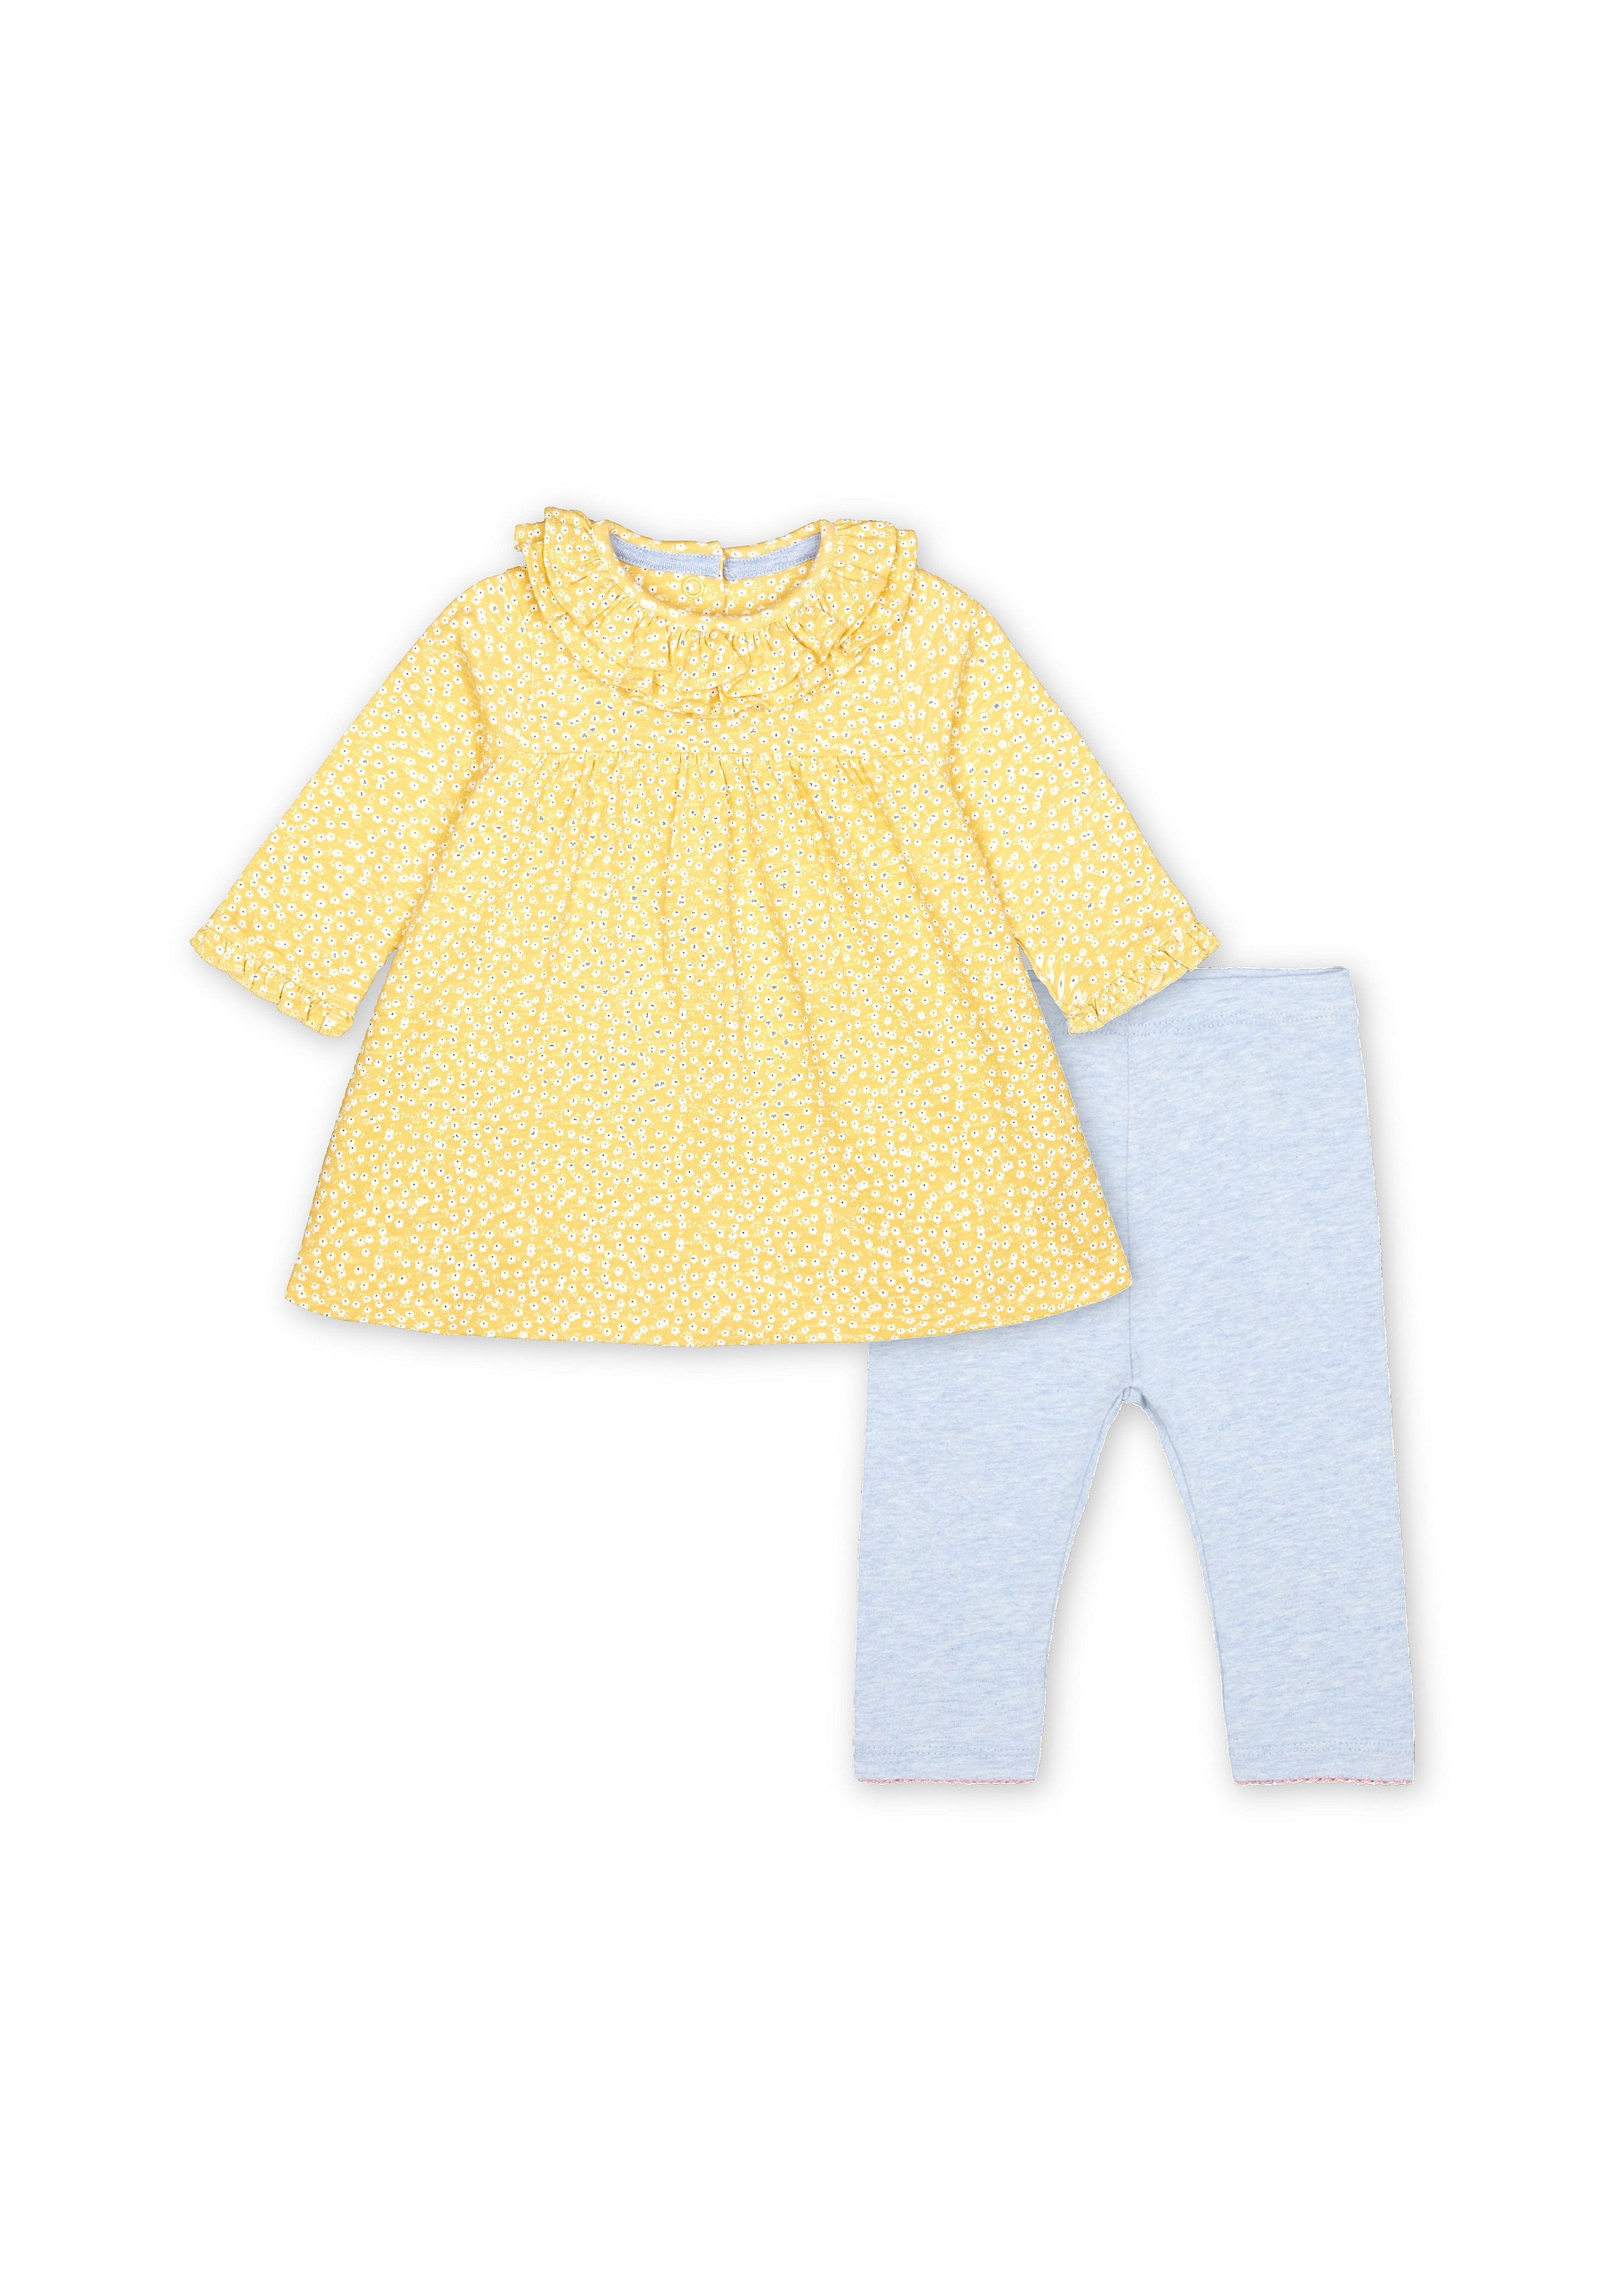 Mothercare | Girls Full Sleeves Dress And Legging Set Floral Print - Yellow Grey 0